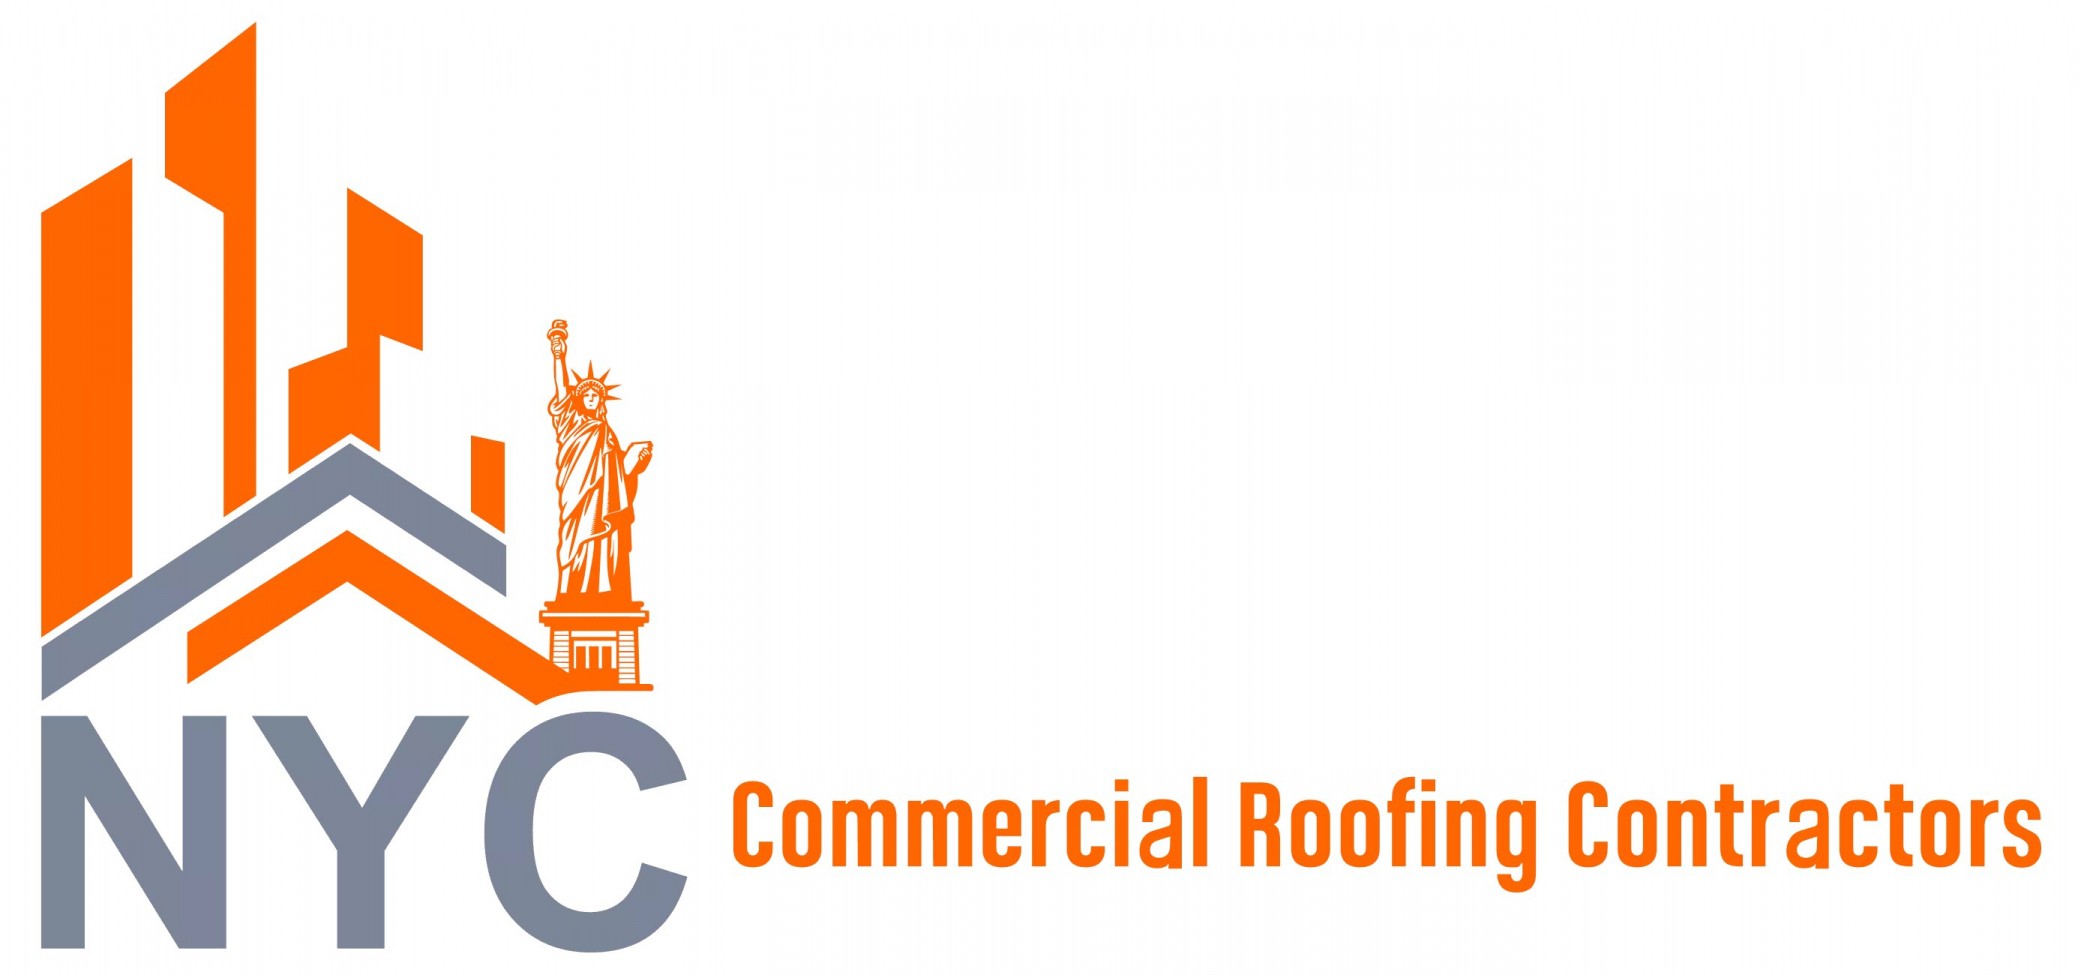 NYC-Commercial-Roofing-Contractors